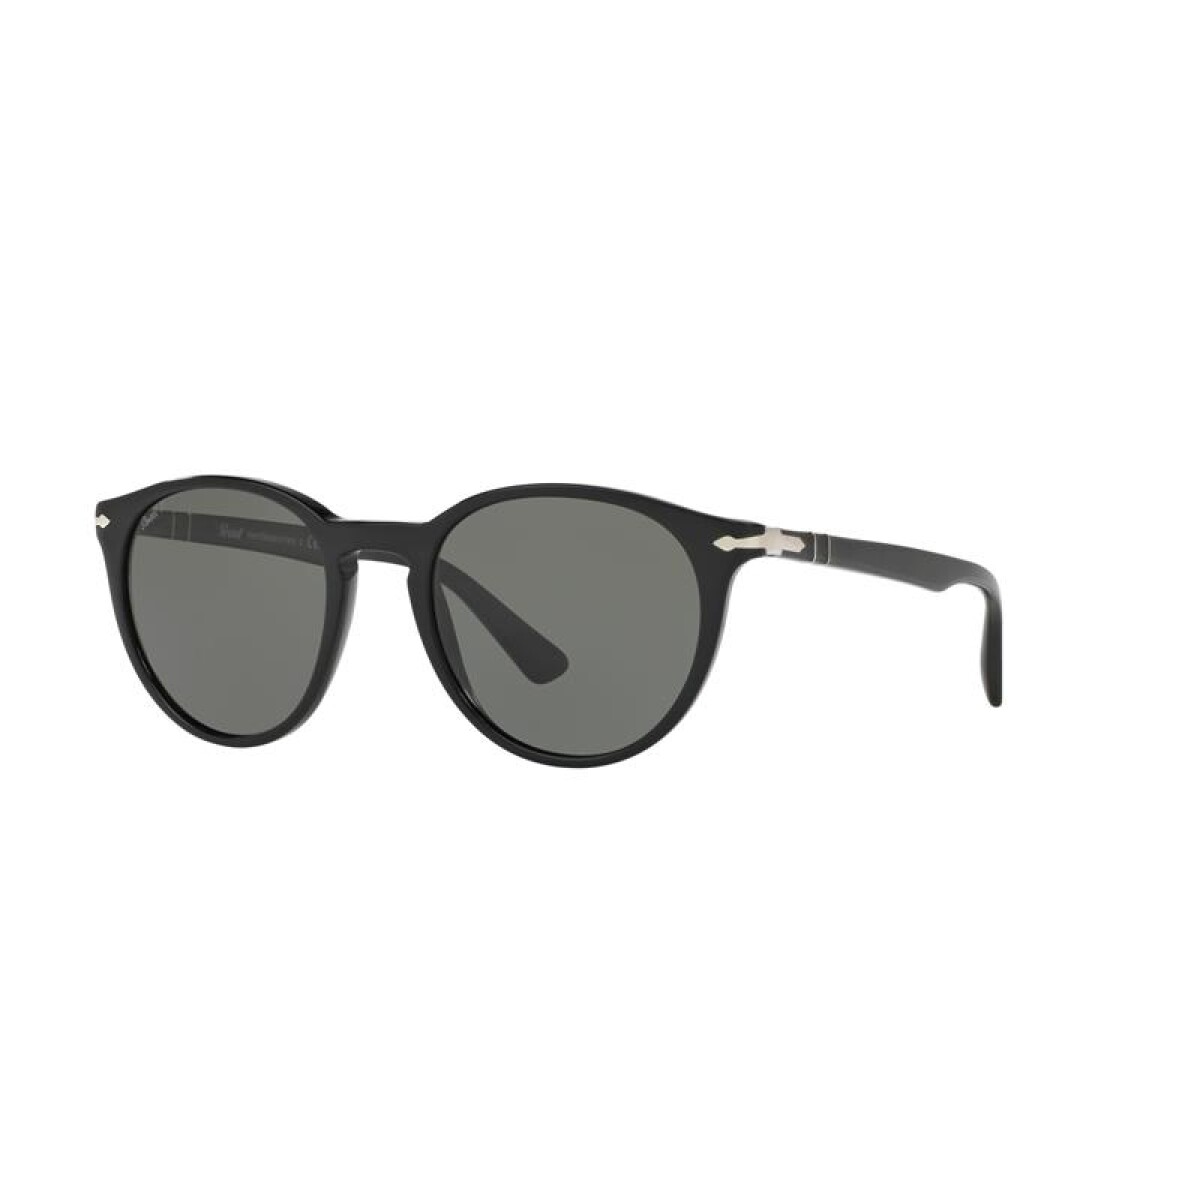 Persol 3152-s - 9014/58 